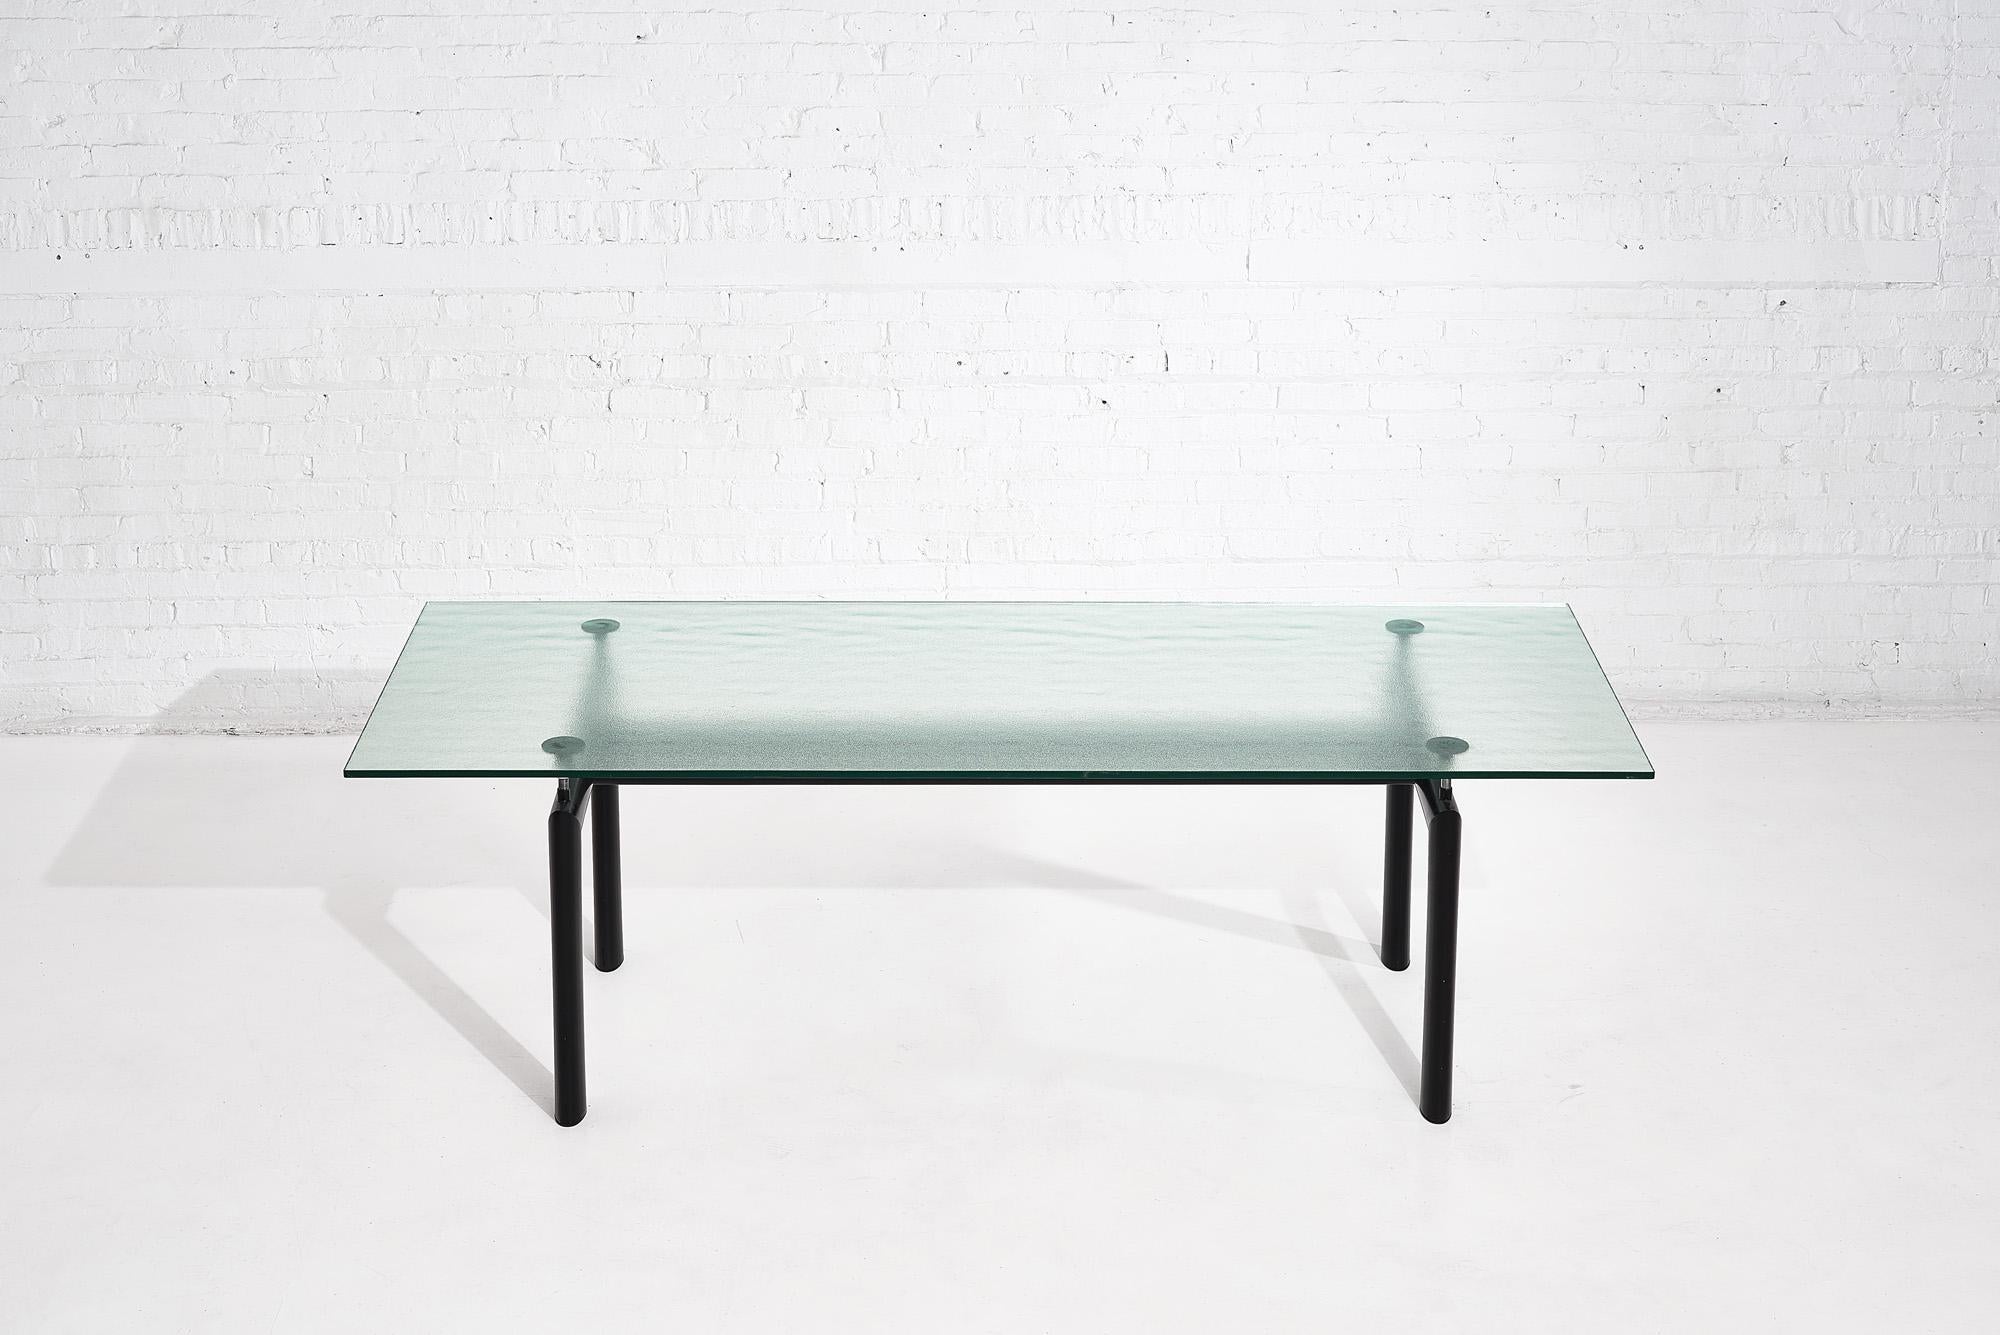 Le Corbusier Cassina LC6 dining table, 1980’s. Original black metal and vintage textured glass. Designed in 1928 by Le Corbusier, Pierre Jeanneret and Charlotte Perriand.